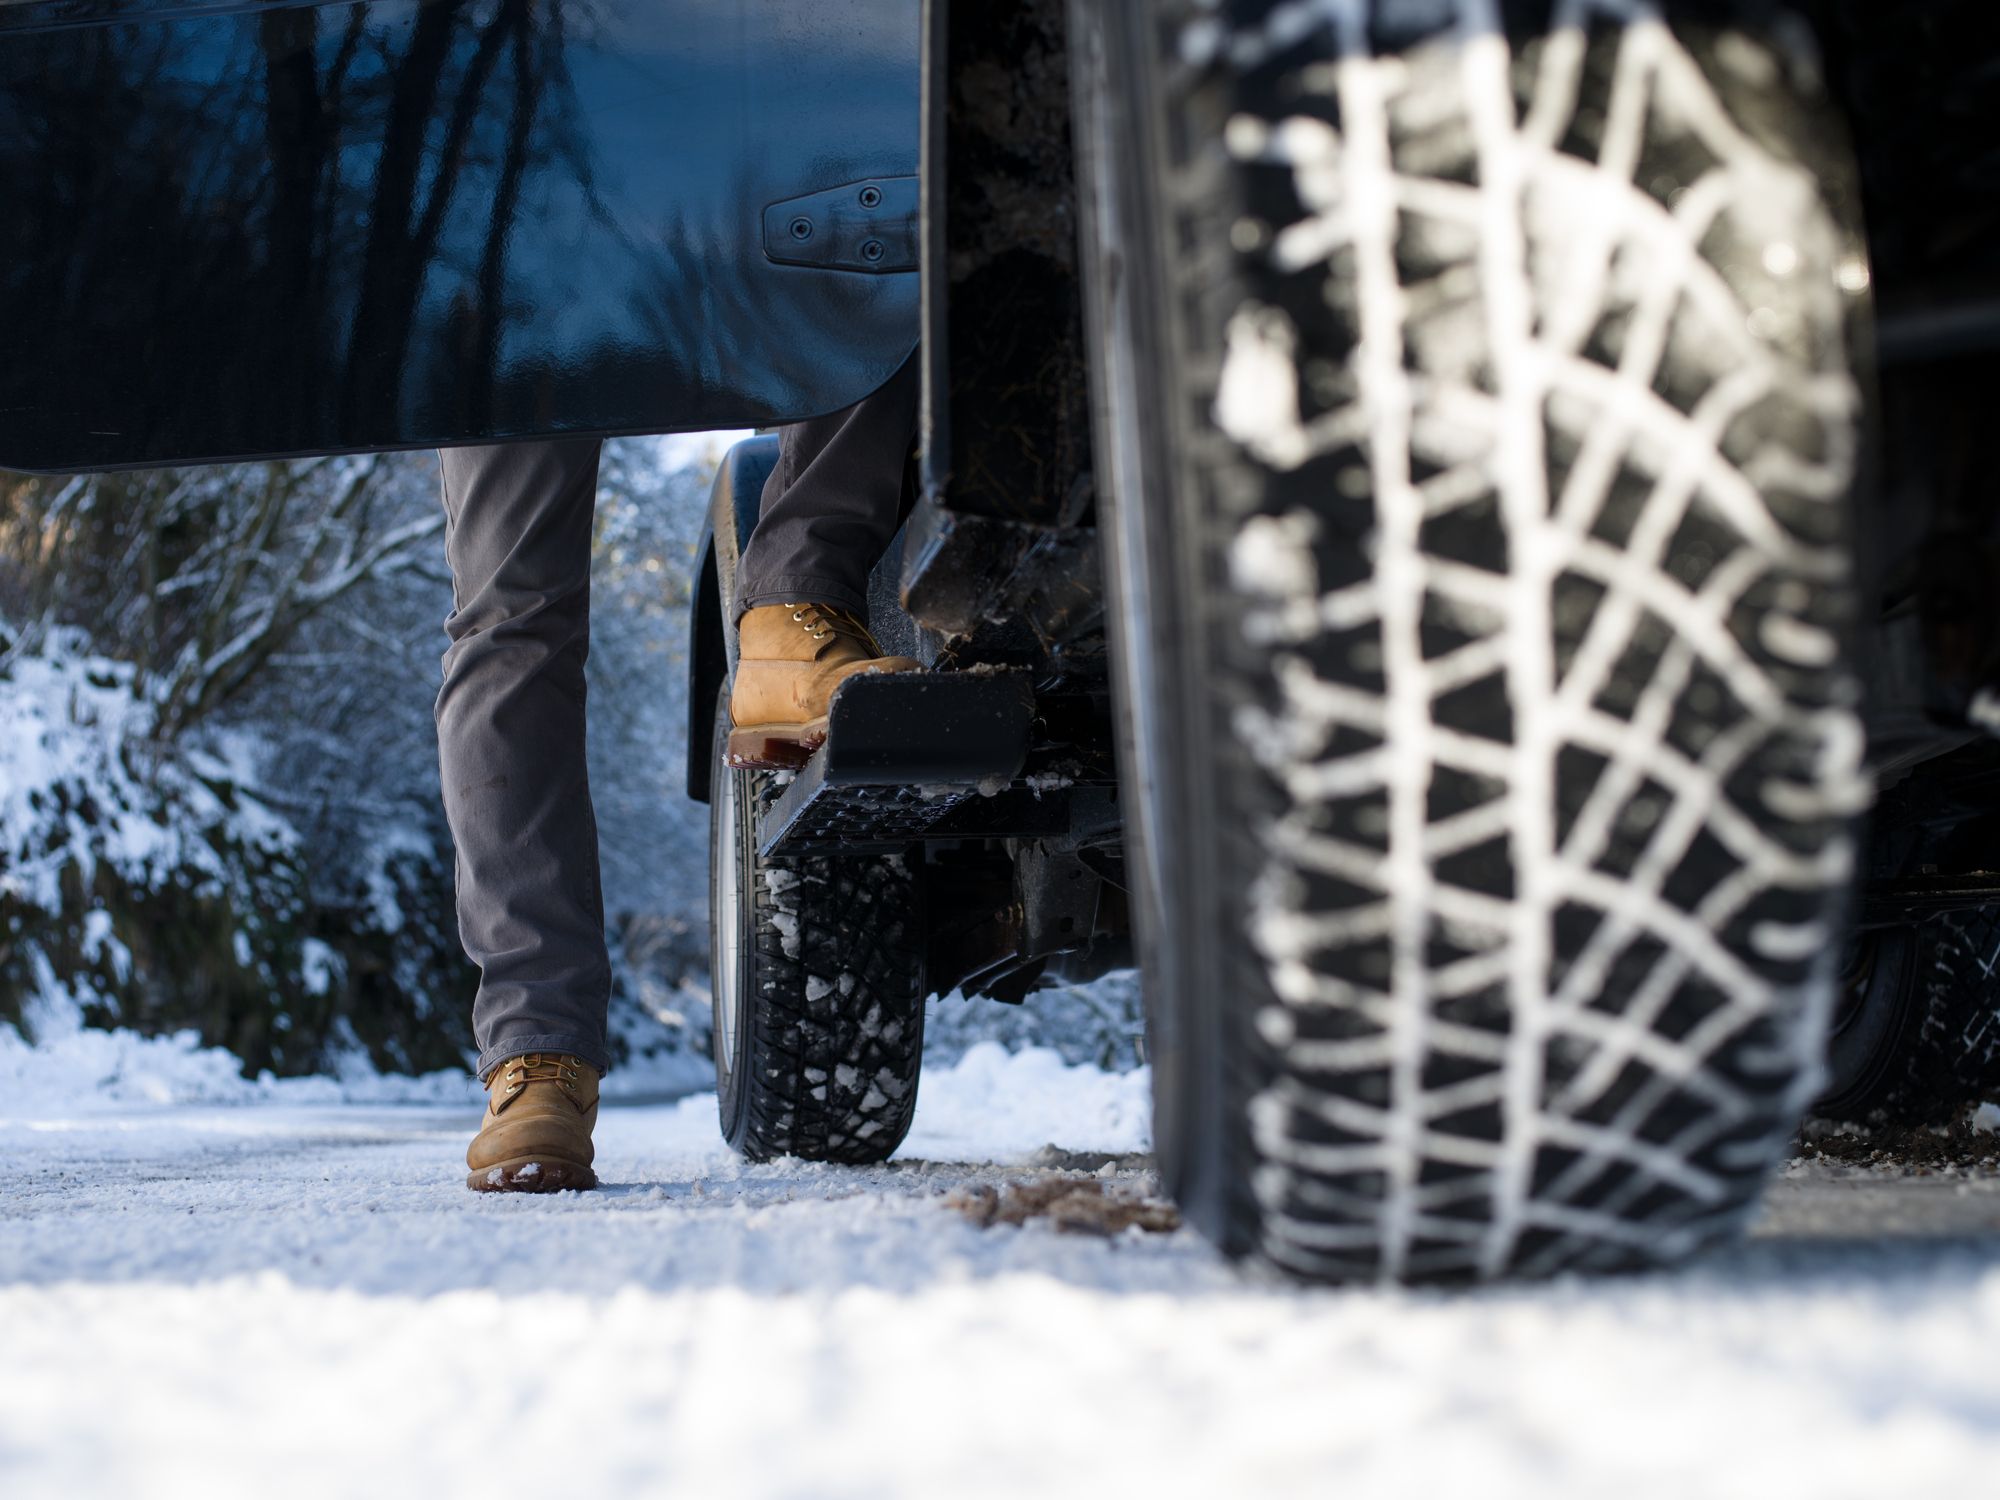 All Season Tires vs. Snow Tires | Can You Use All Season Tires in the Snow?